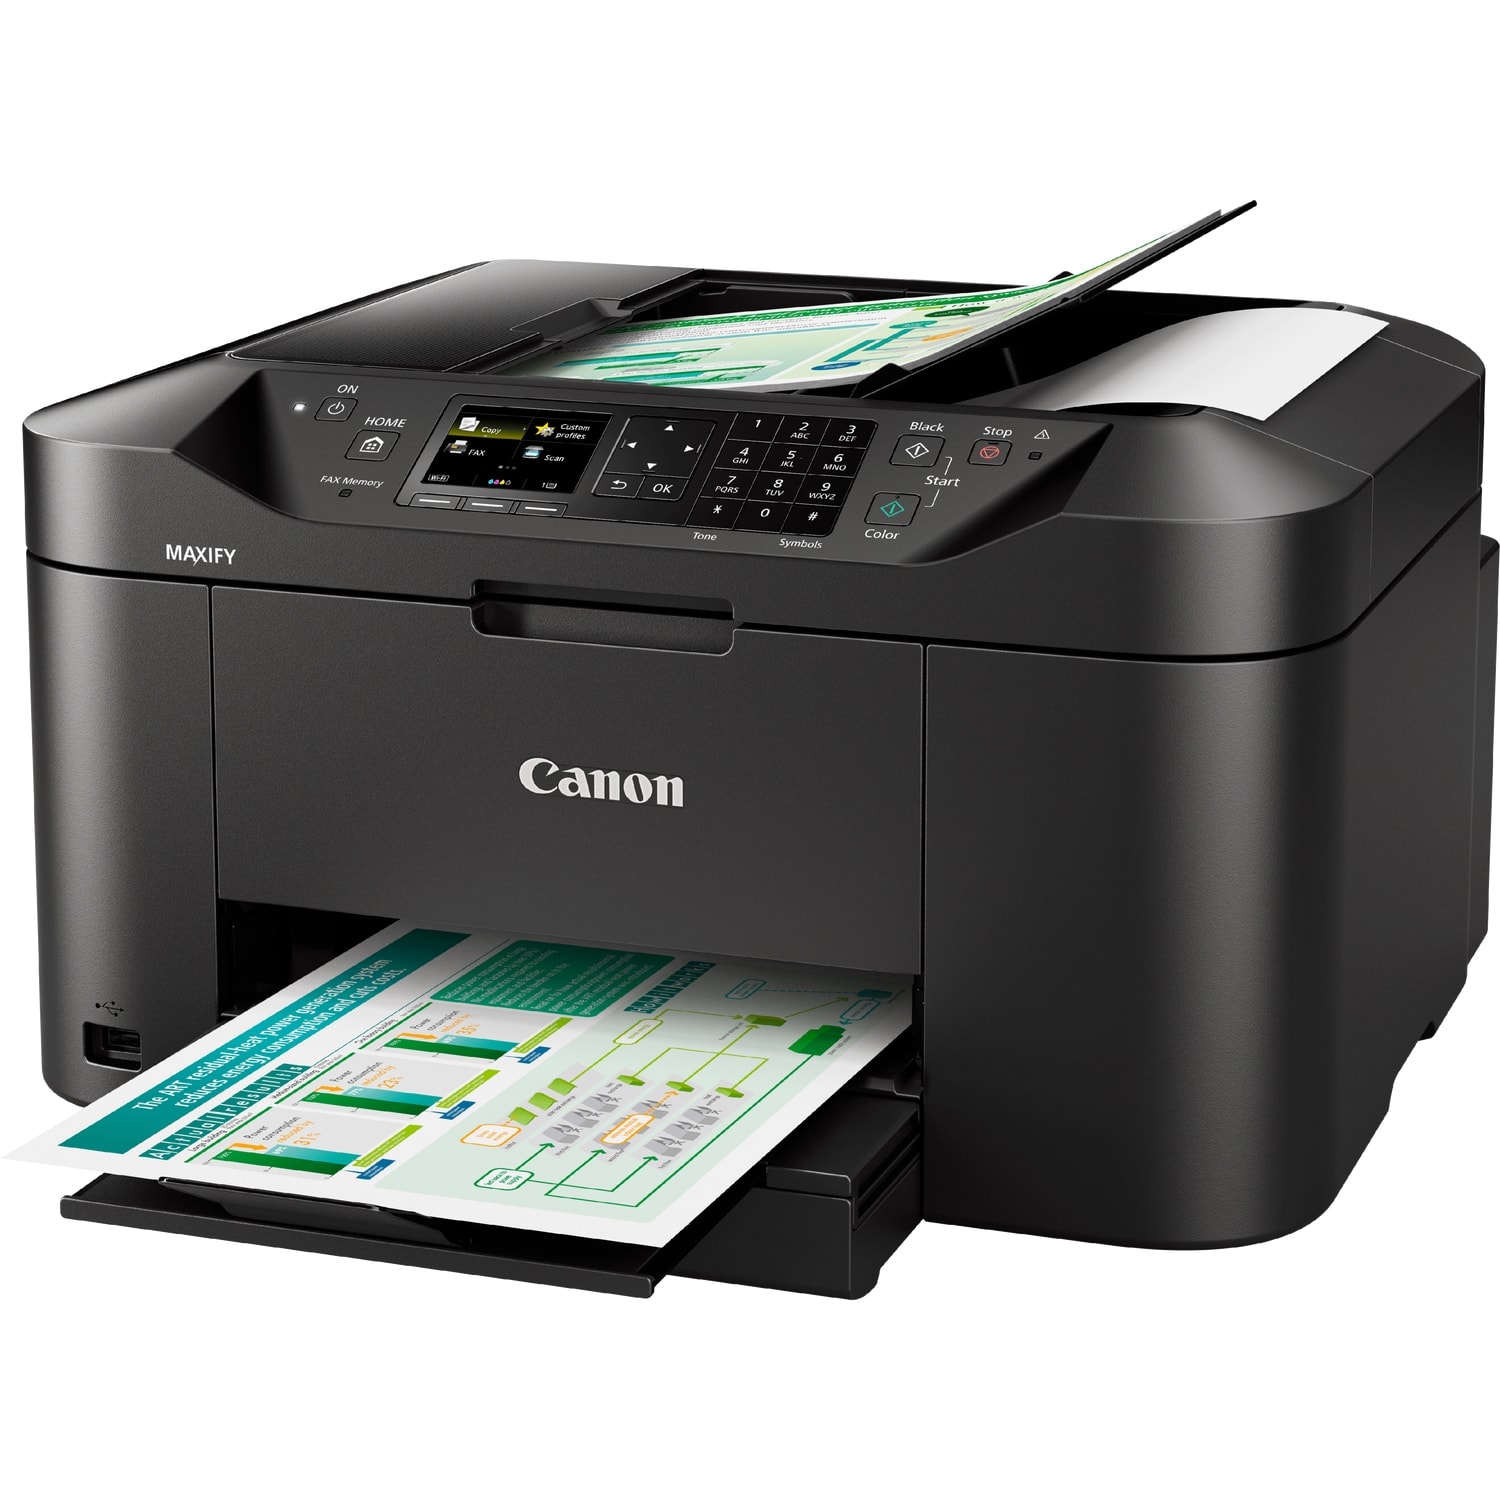 Imprimante multifonction Canon MAXIFY MB2150 - grosbill-pro.com - 1